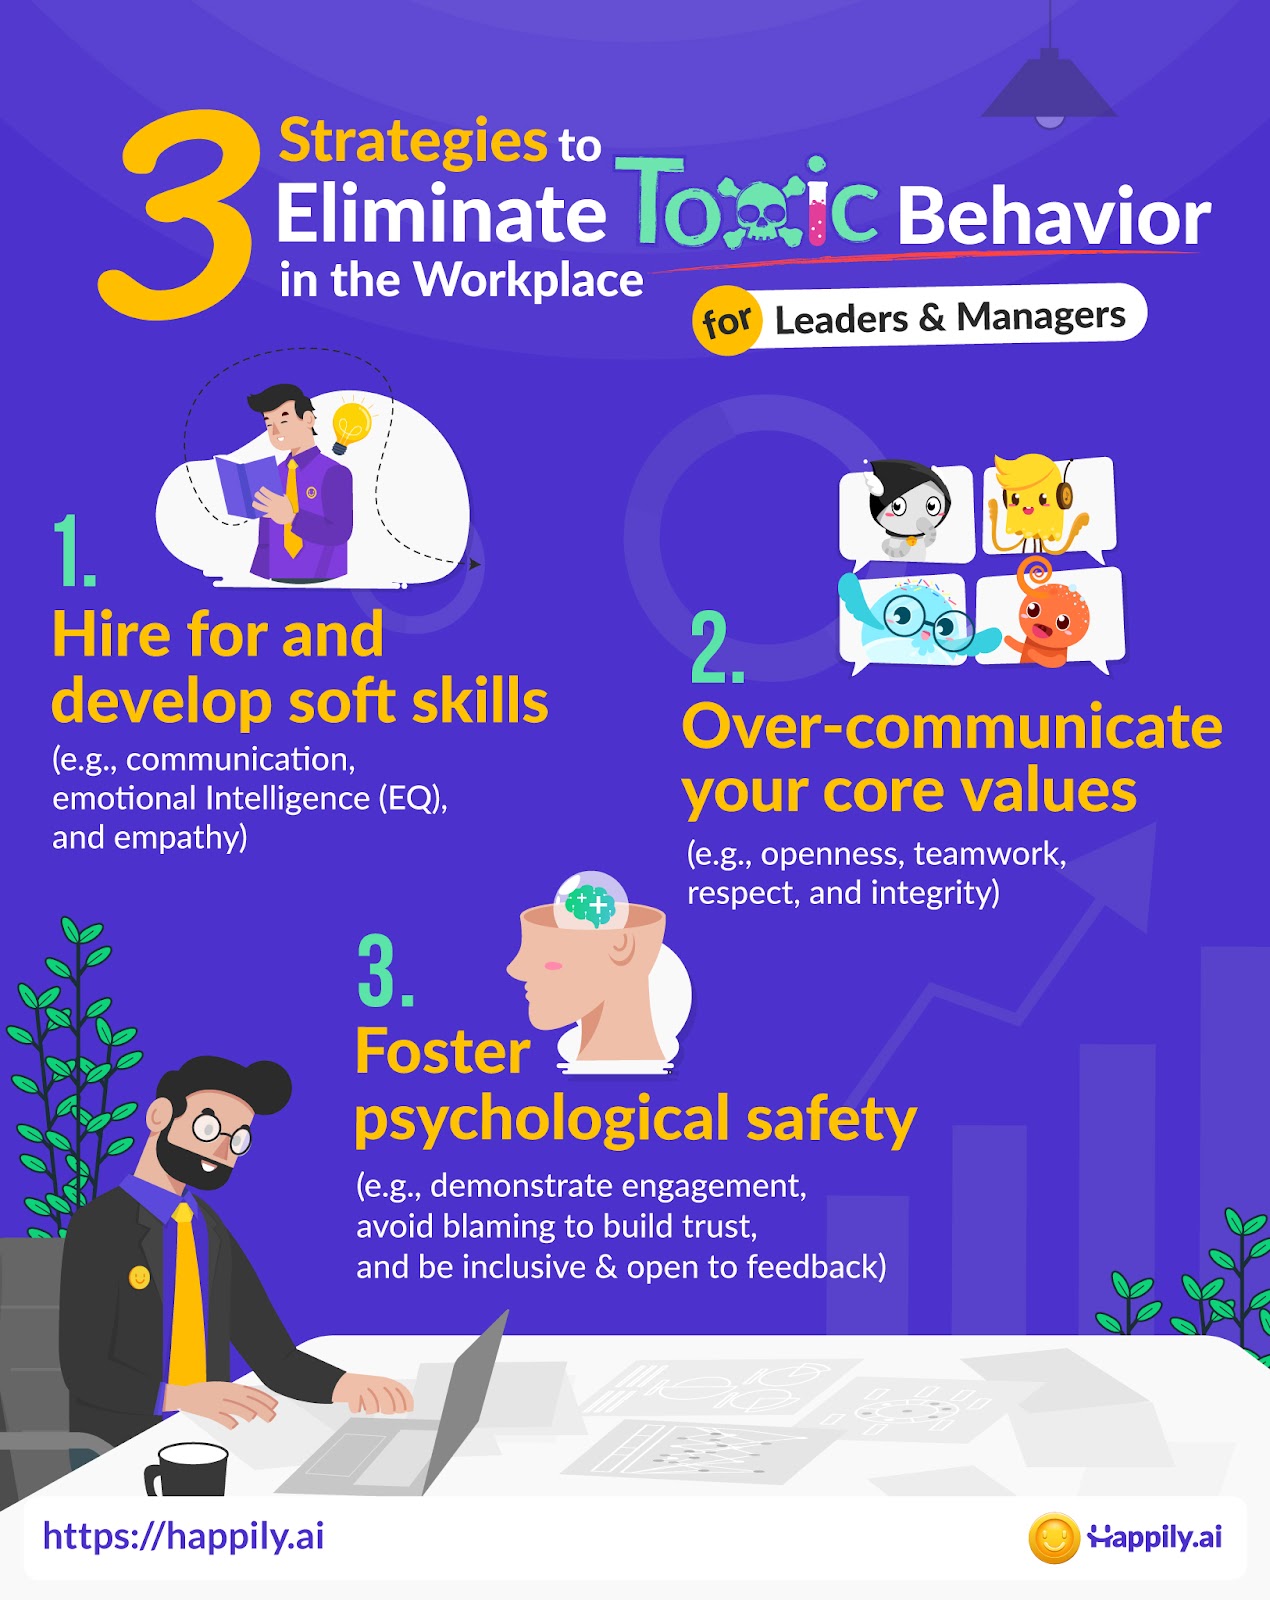 7 toxic team behaviors IT leaders must root out